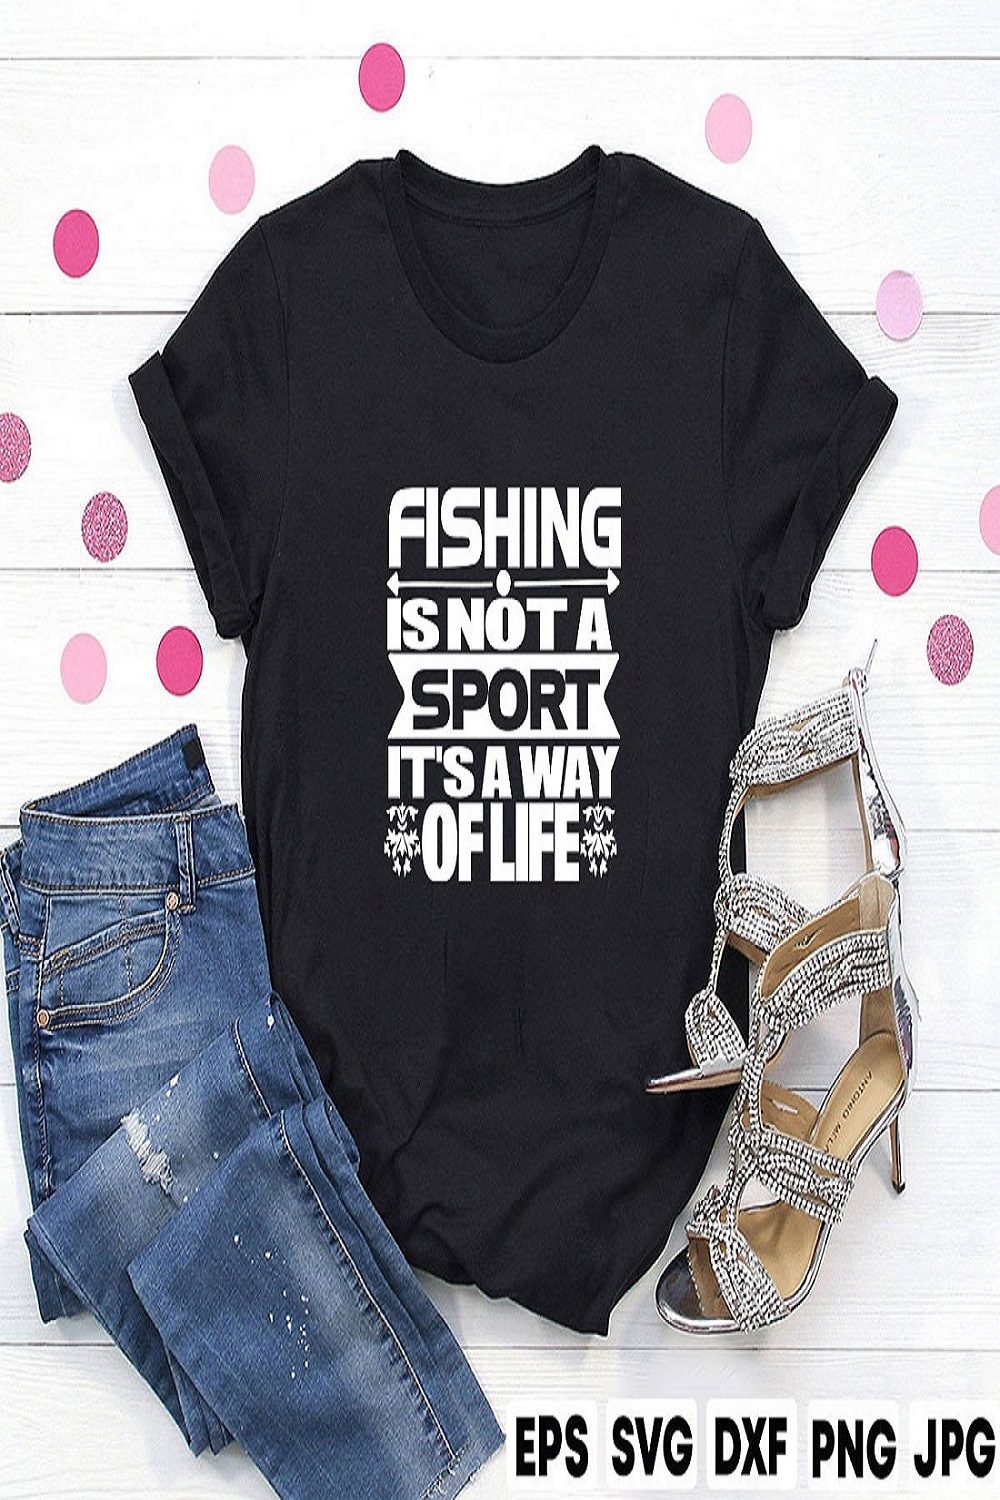 Fishing is not a sport it's away of life pinterest preview image.